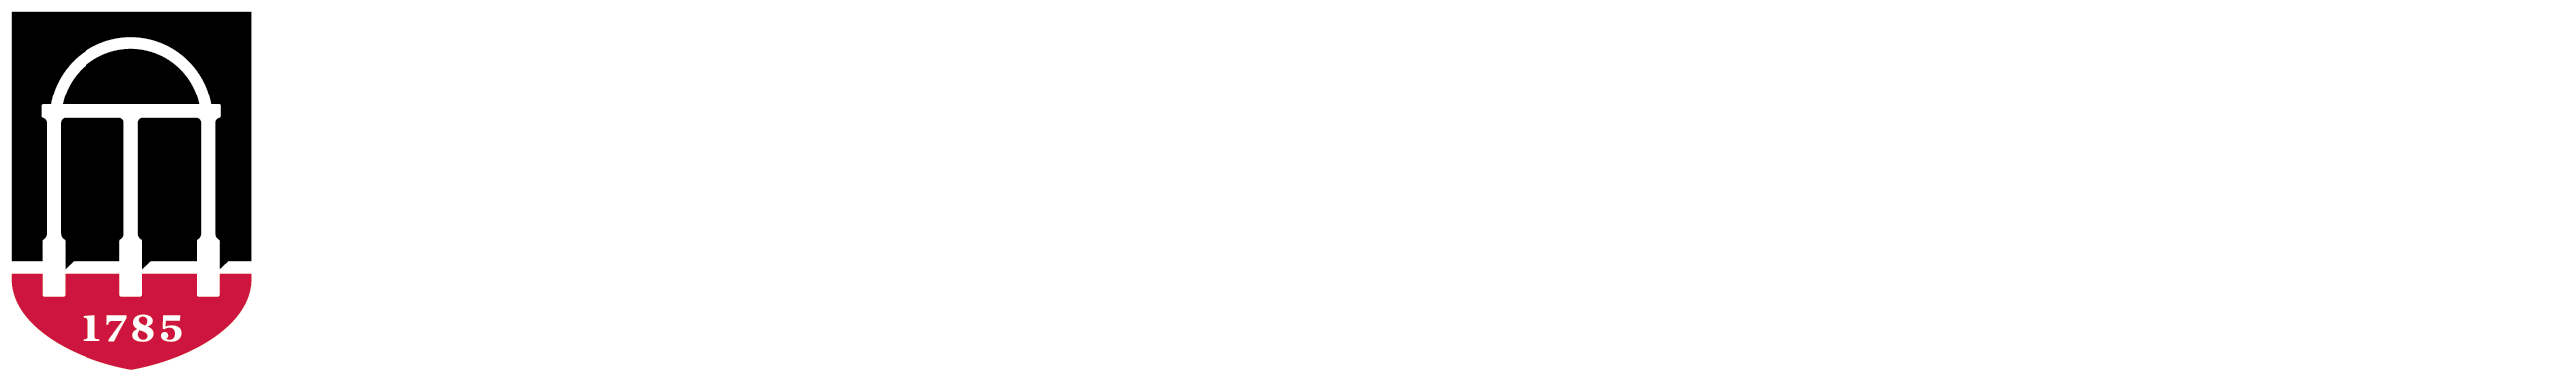 Plantation Management Research Cooperative, Warnell School of Forestry and Natural Resources, University of Georgia